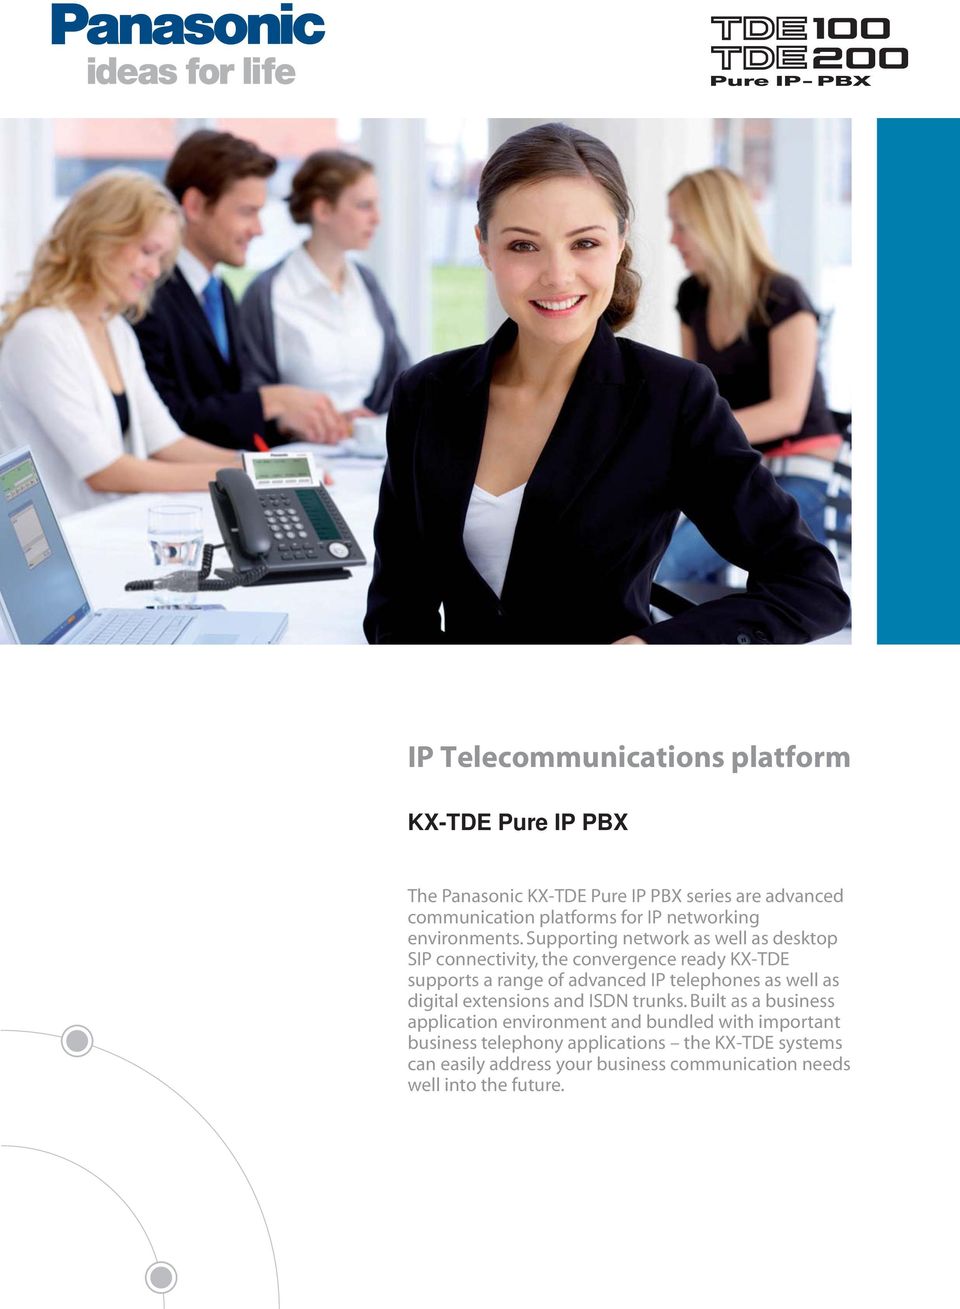 Supporting network as well as desktop SIP connectivity, the convergence ready KX-TDE supports a range of advanced IP telephones as